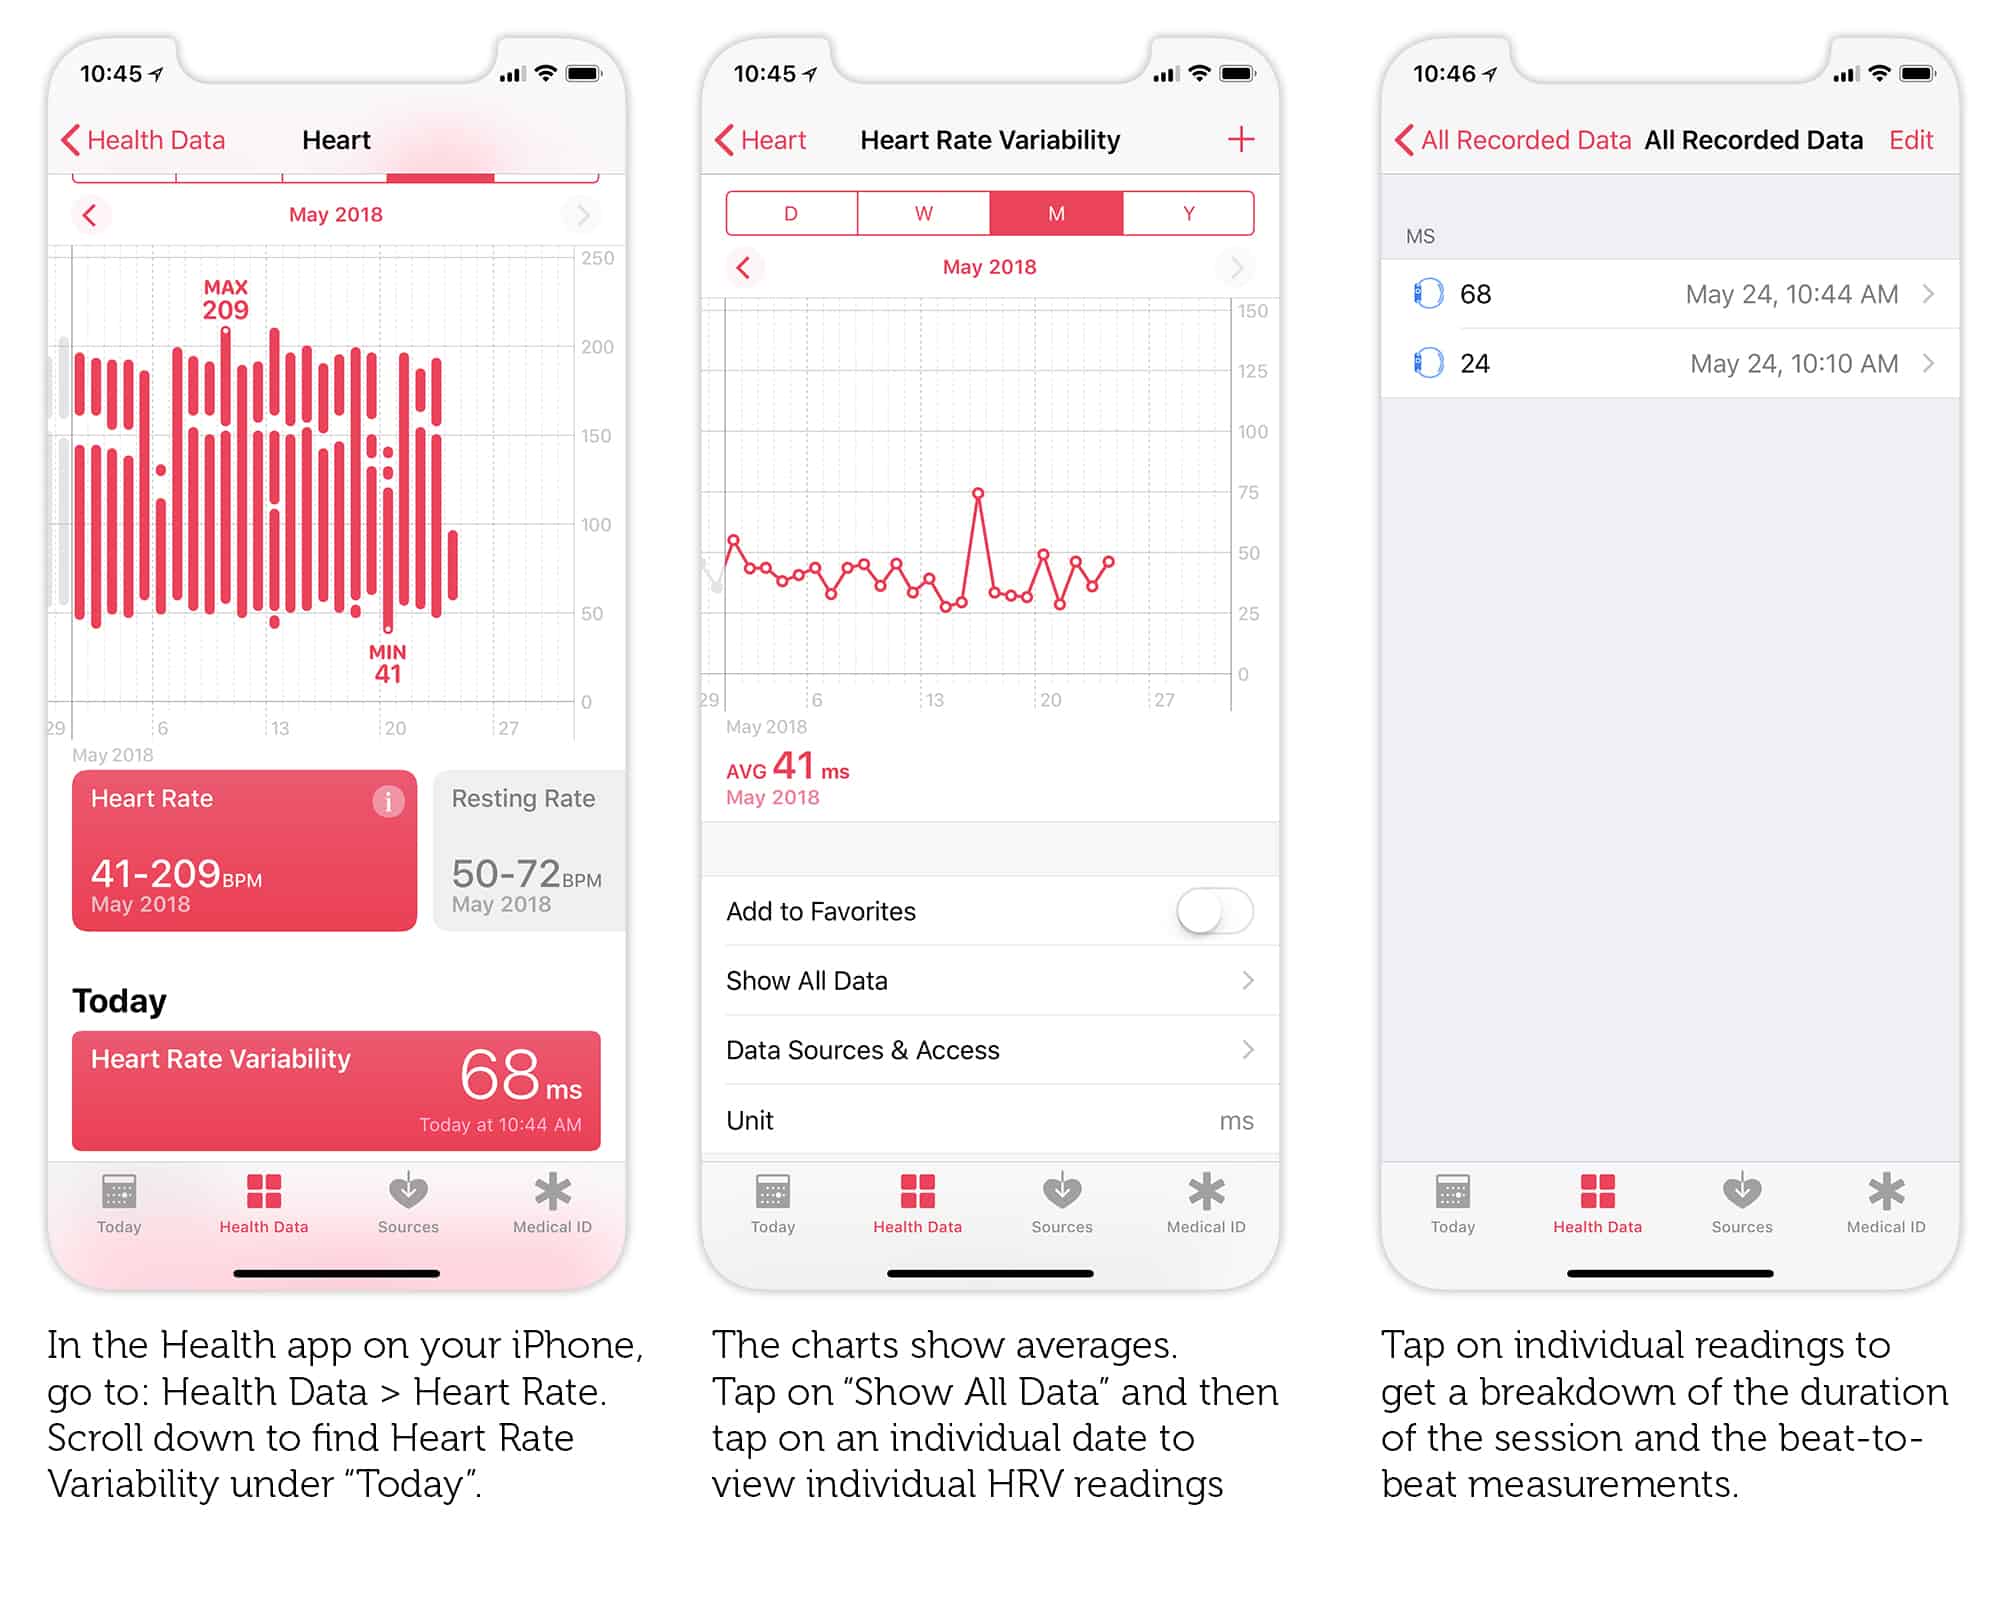 Check your Heart Rate Variability readings with the Health app on your iPhone